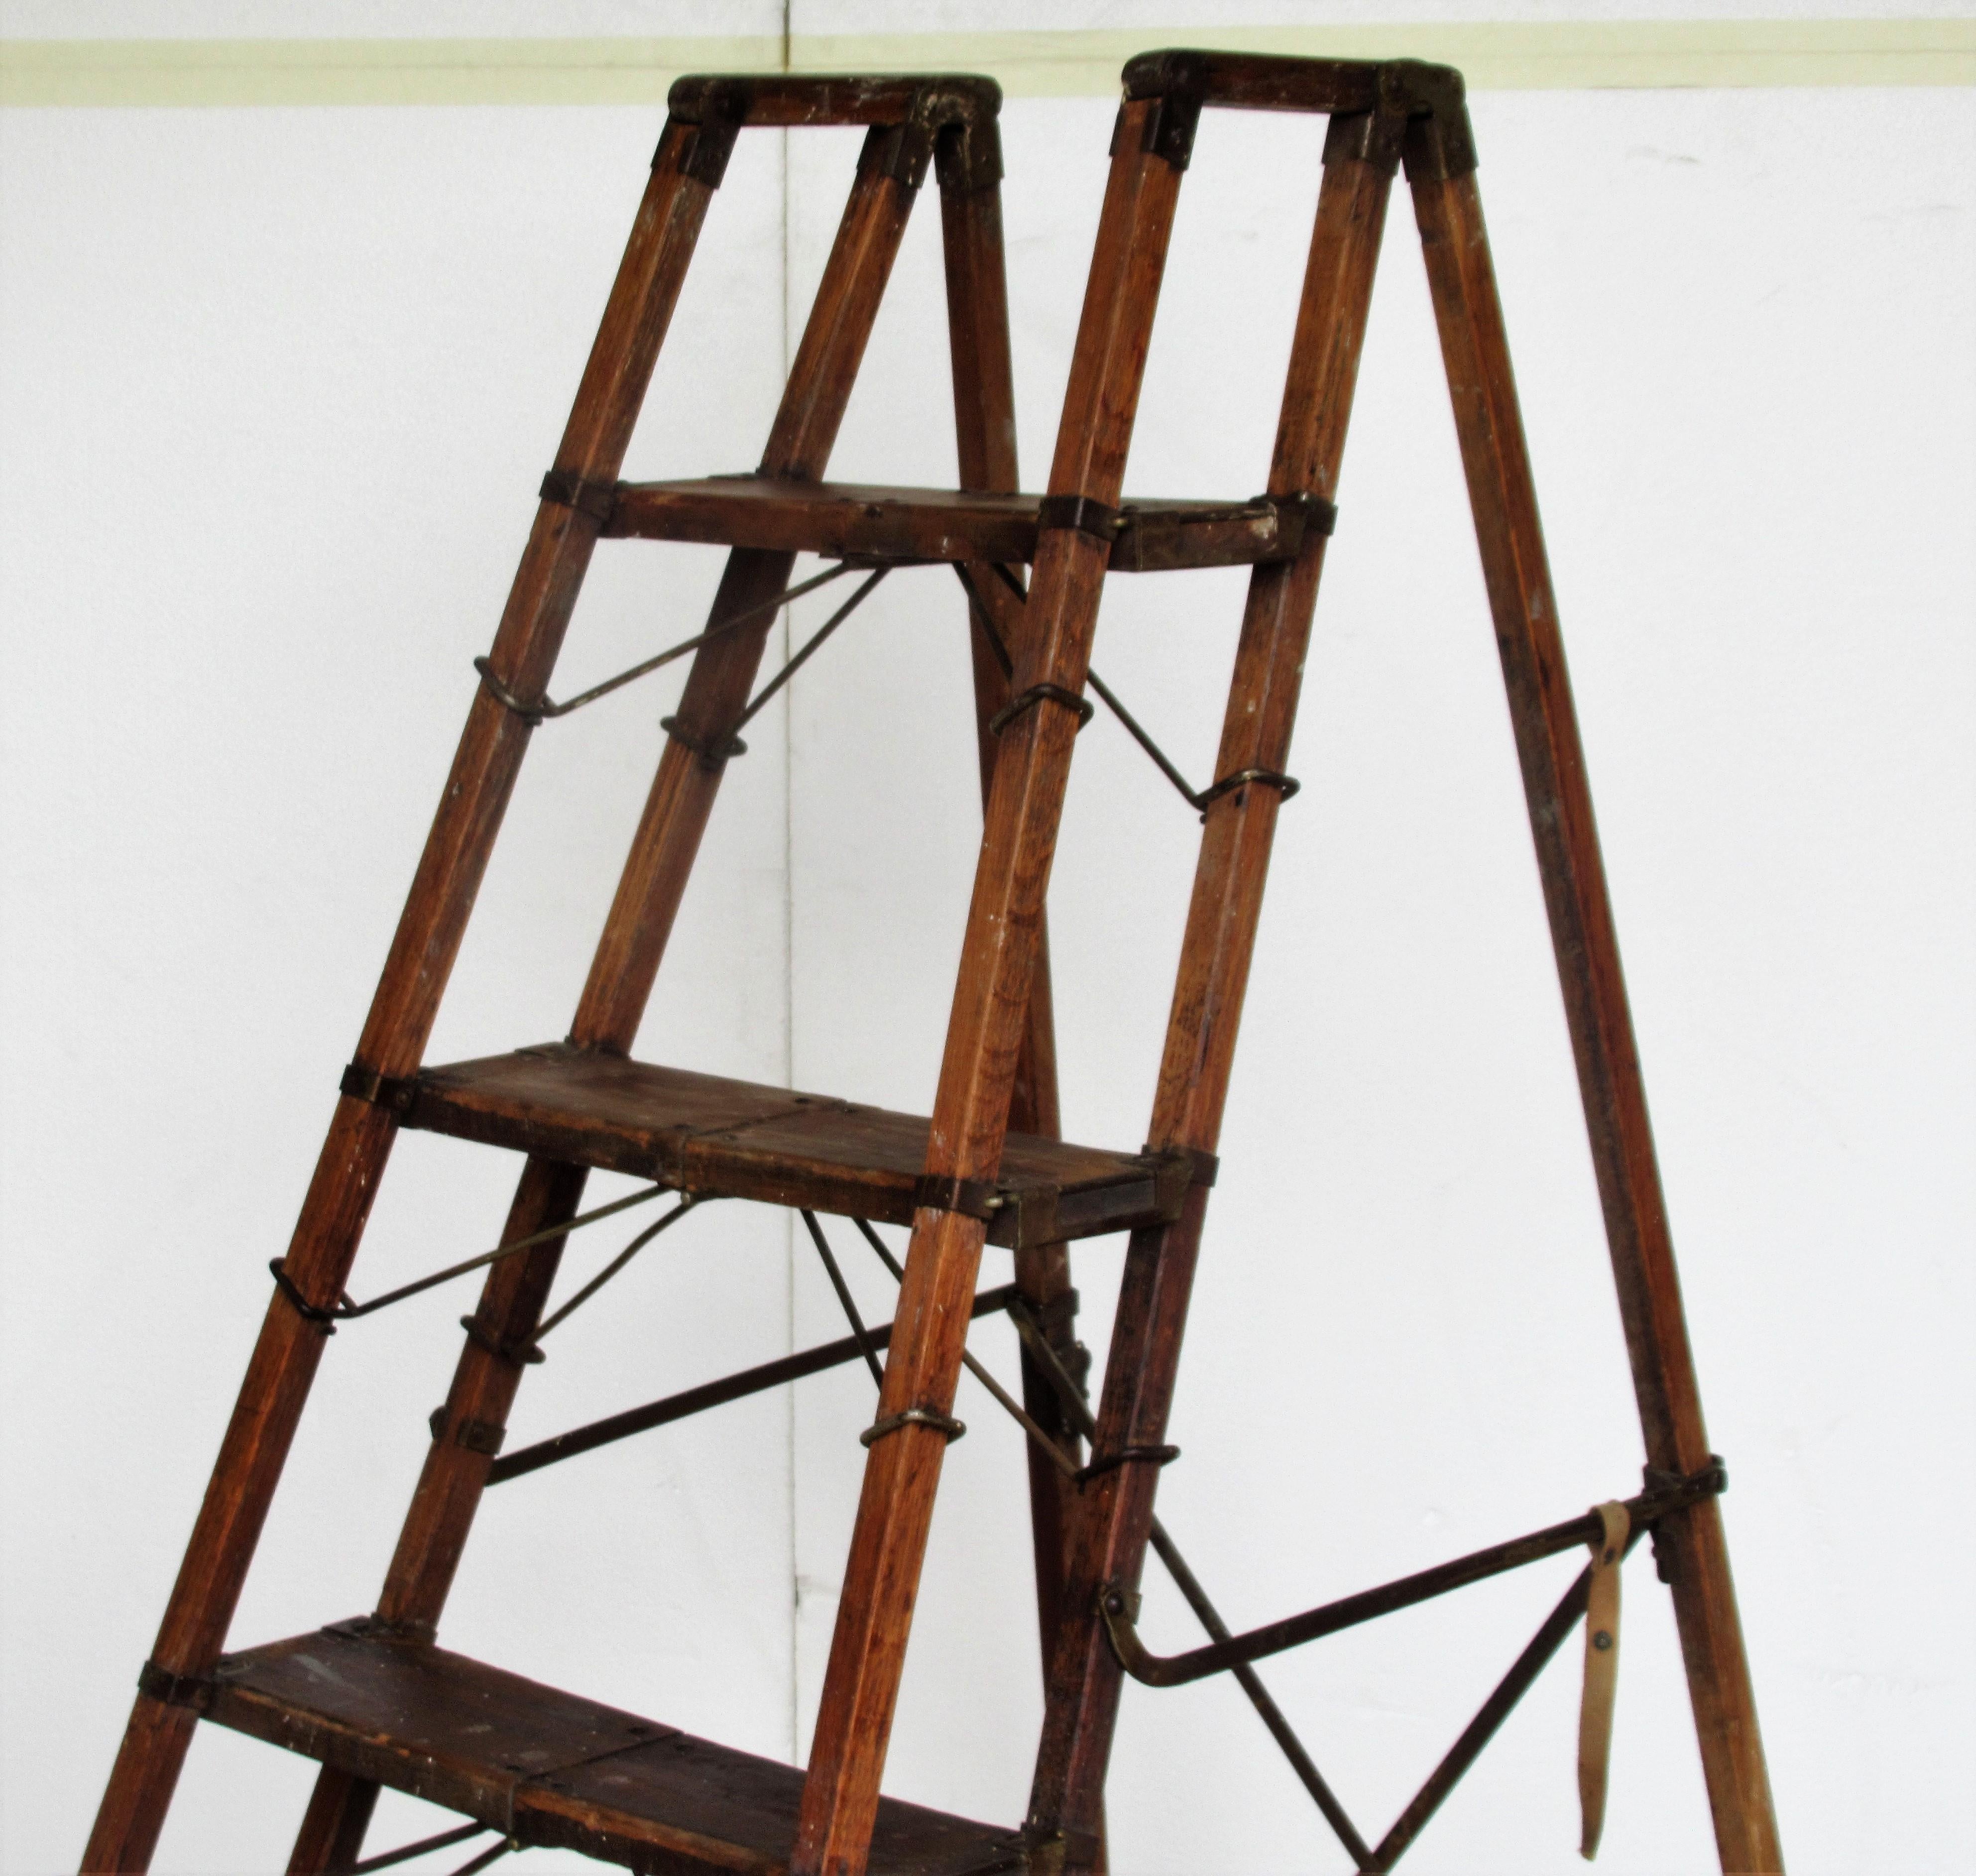 Antique American patent metamorphic ladder with oak framework, maple steps, iron hinges, rods, straps and rivets. Measures for use as shown set up in pictures - 49 inches high x 36 inches wide x 22 inches deep. The steps and sides collapse and fold